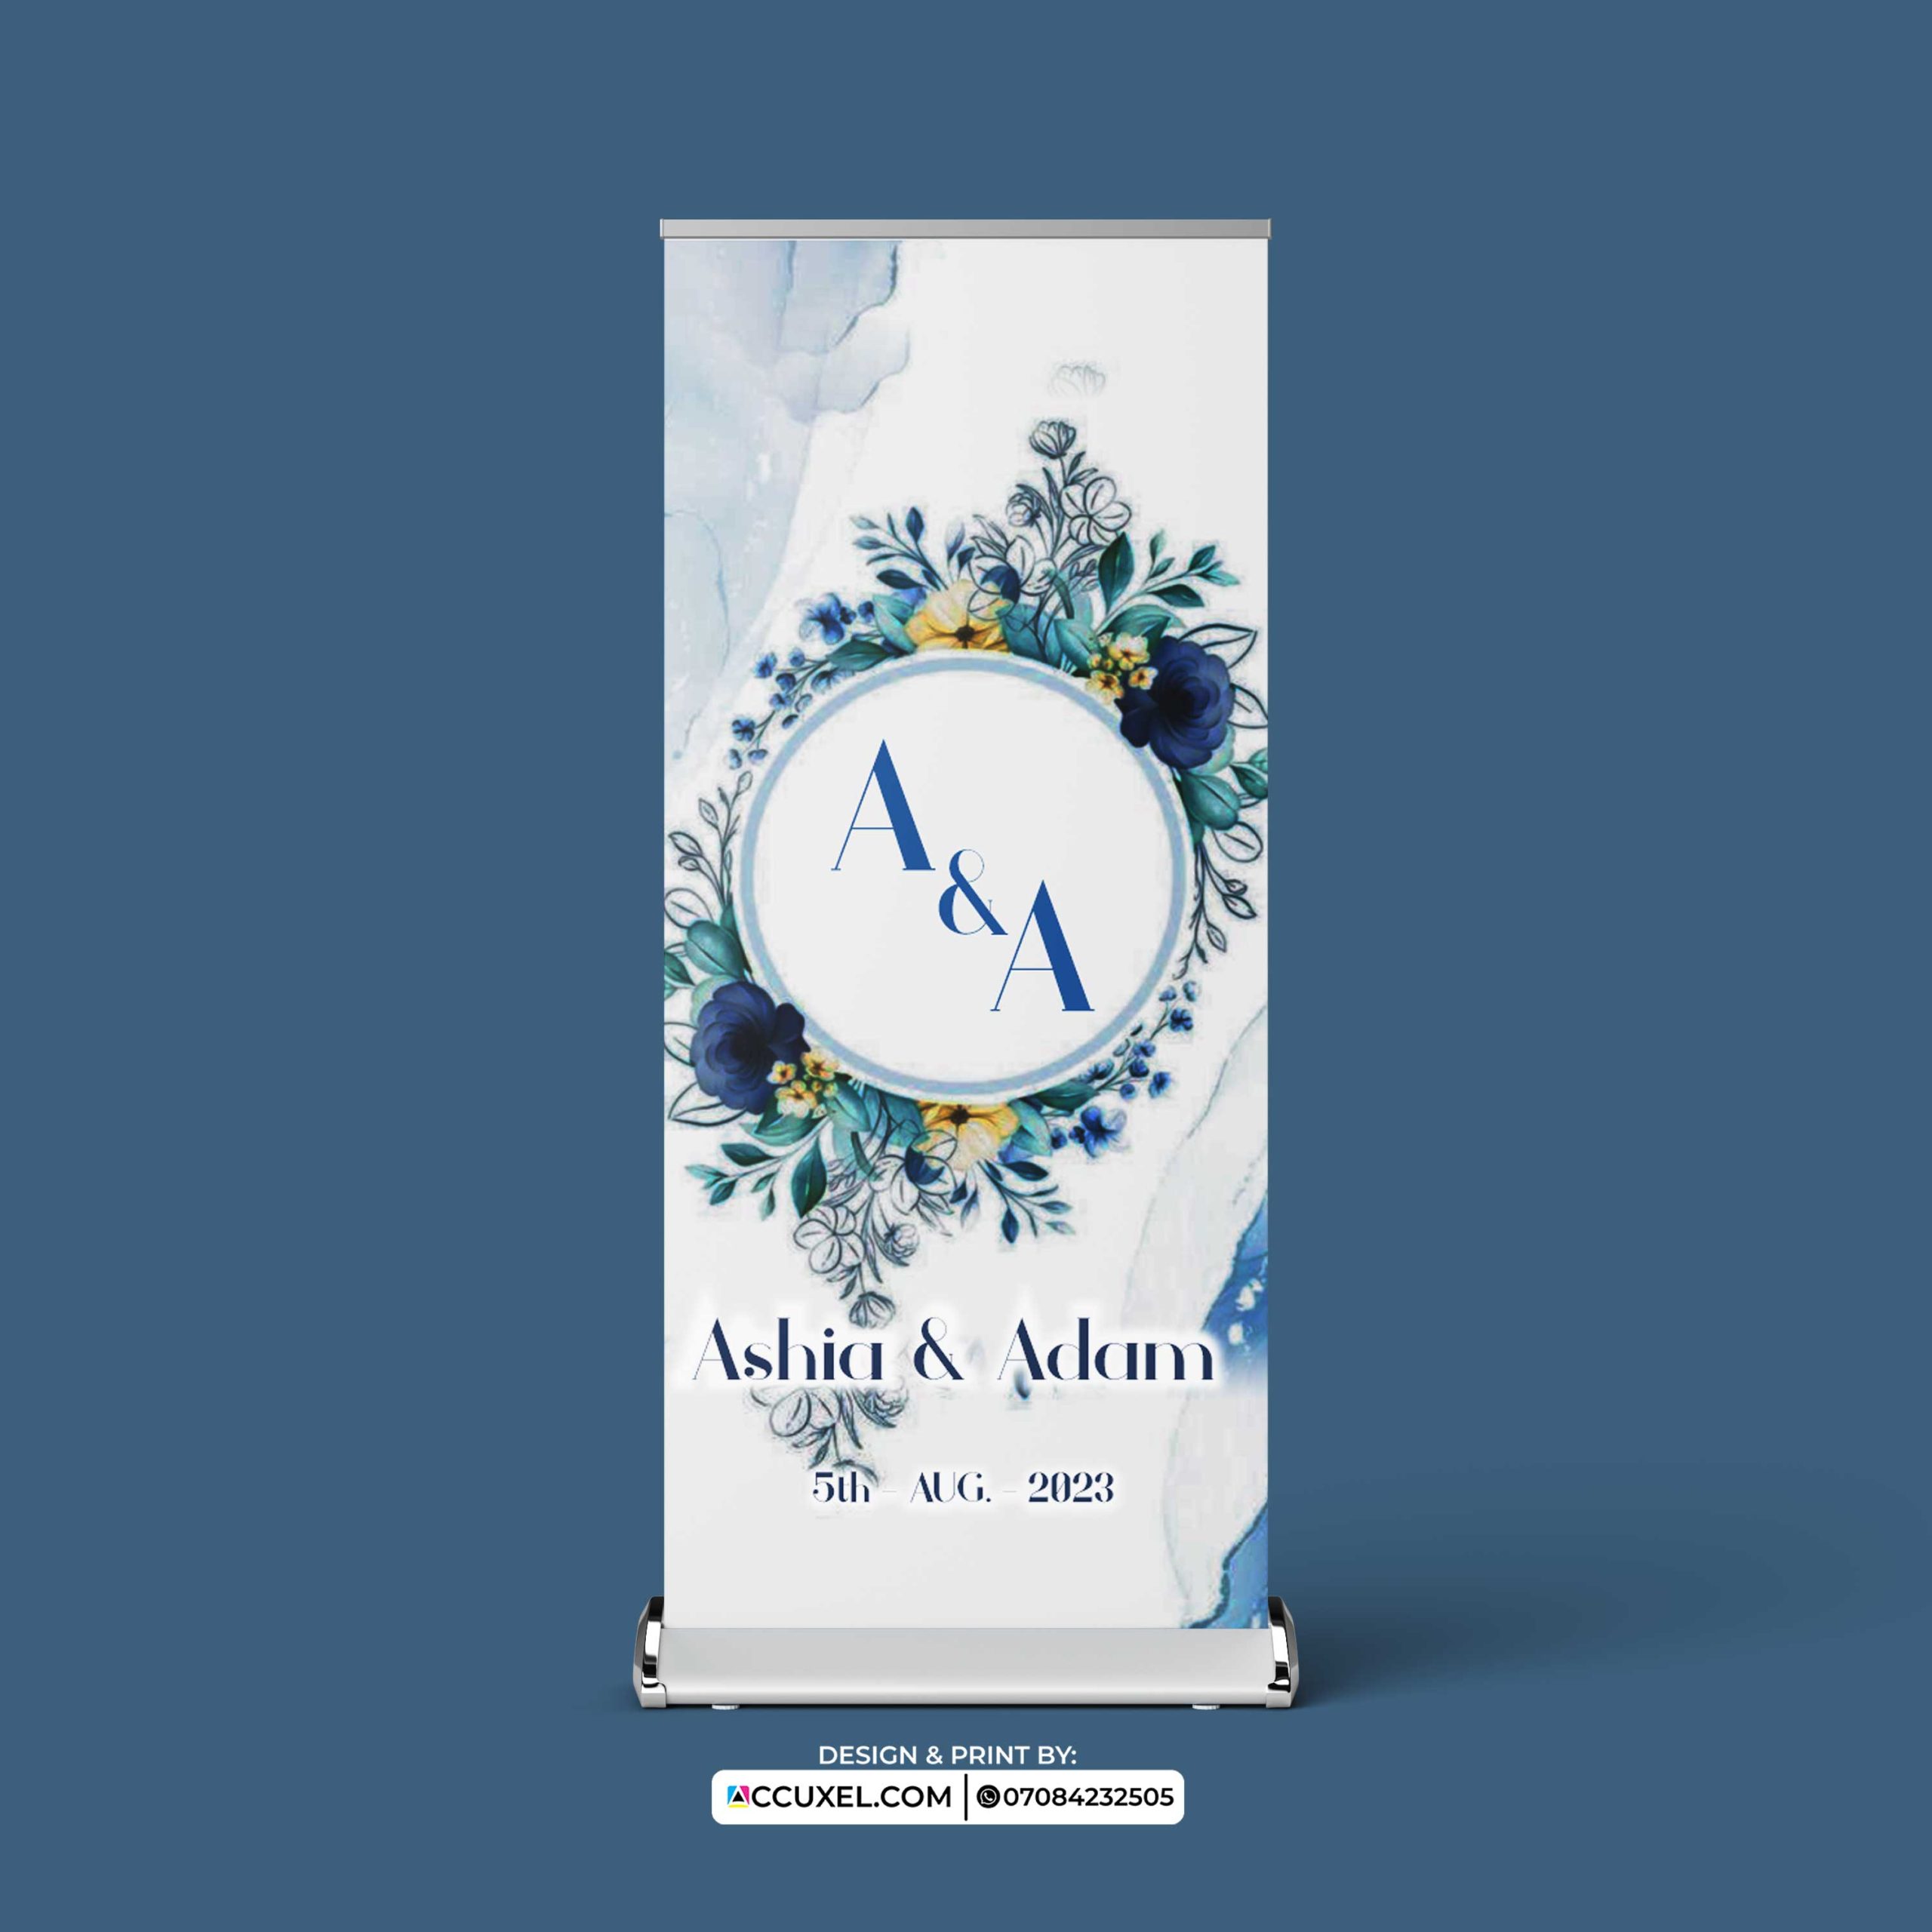 Roll-ups Banners, Fast & Free Delivery